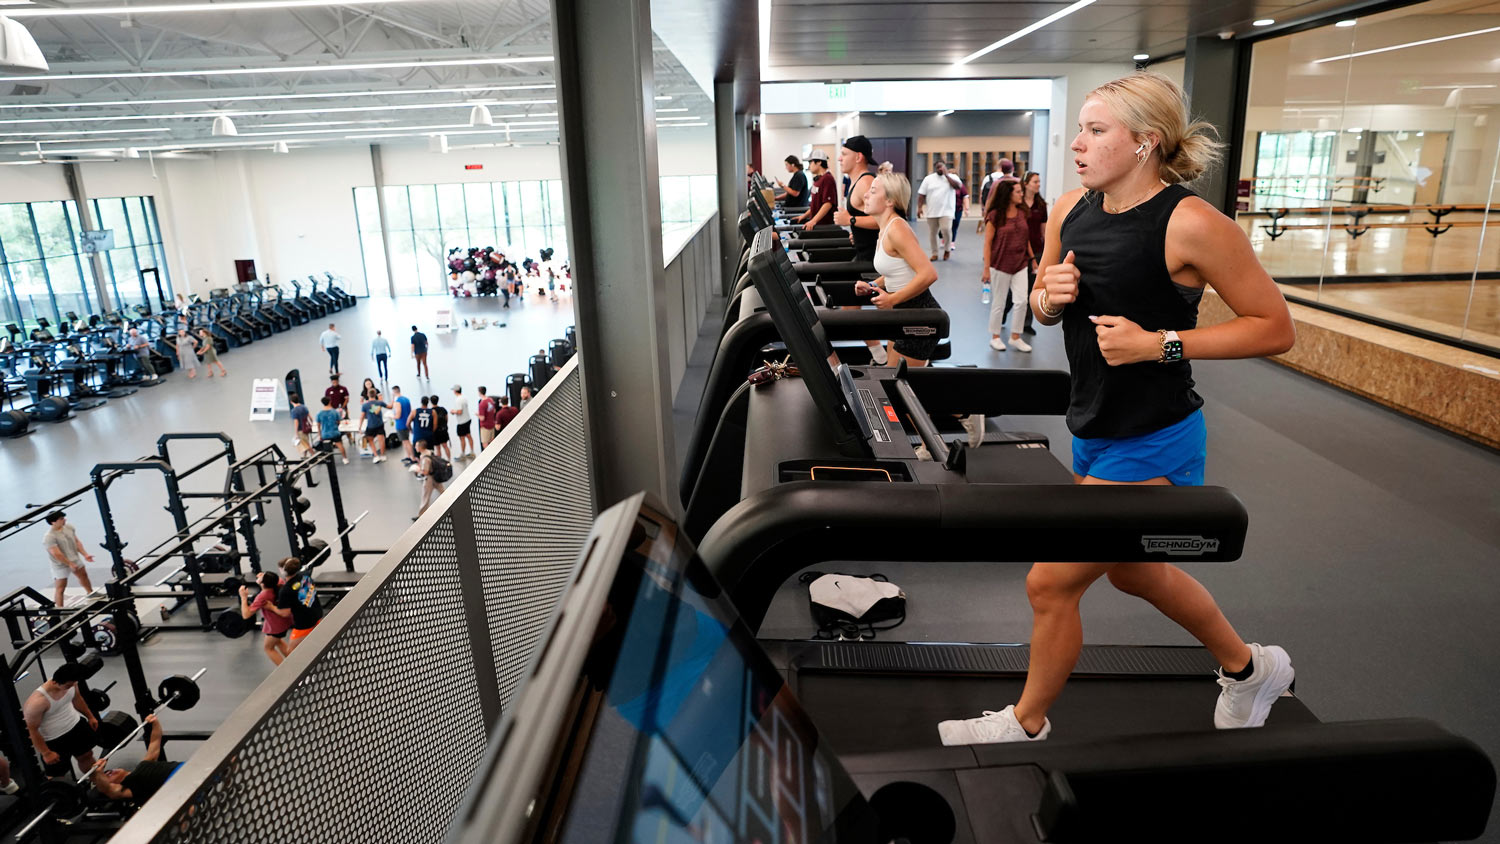 A student runs on a treadmill overlooking the weight lifting area on the first floor.